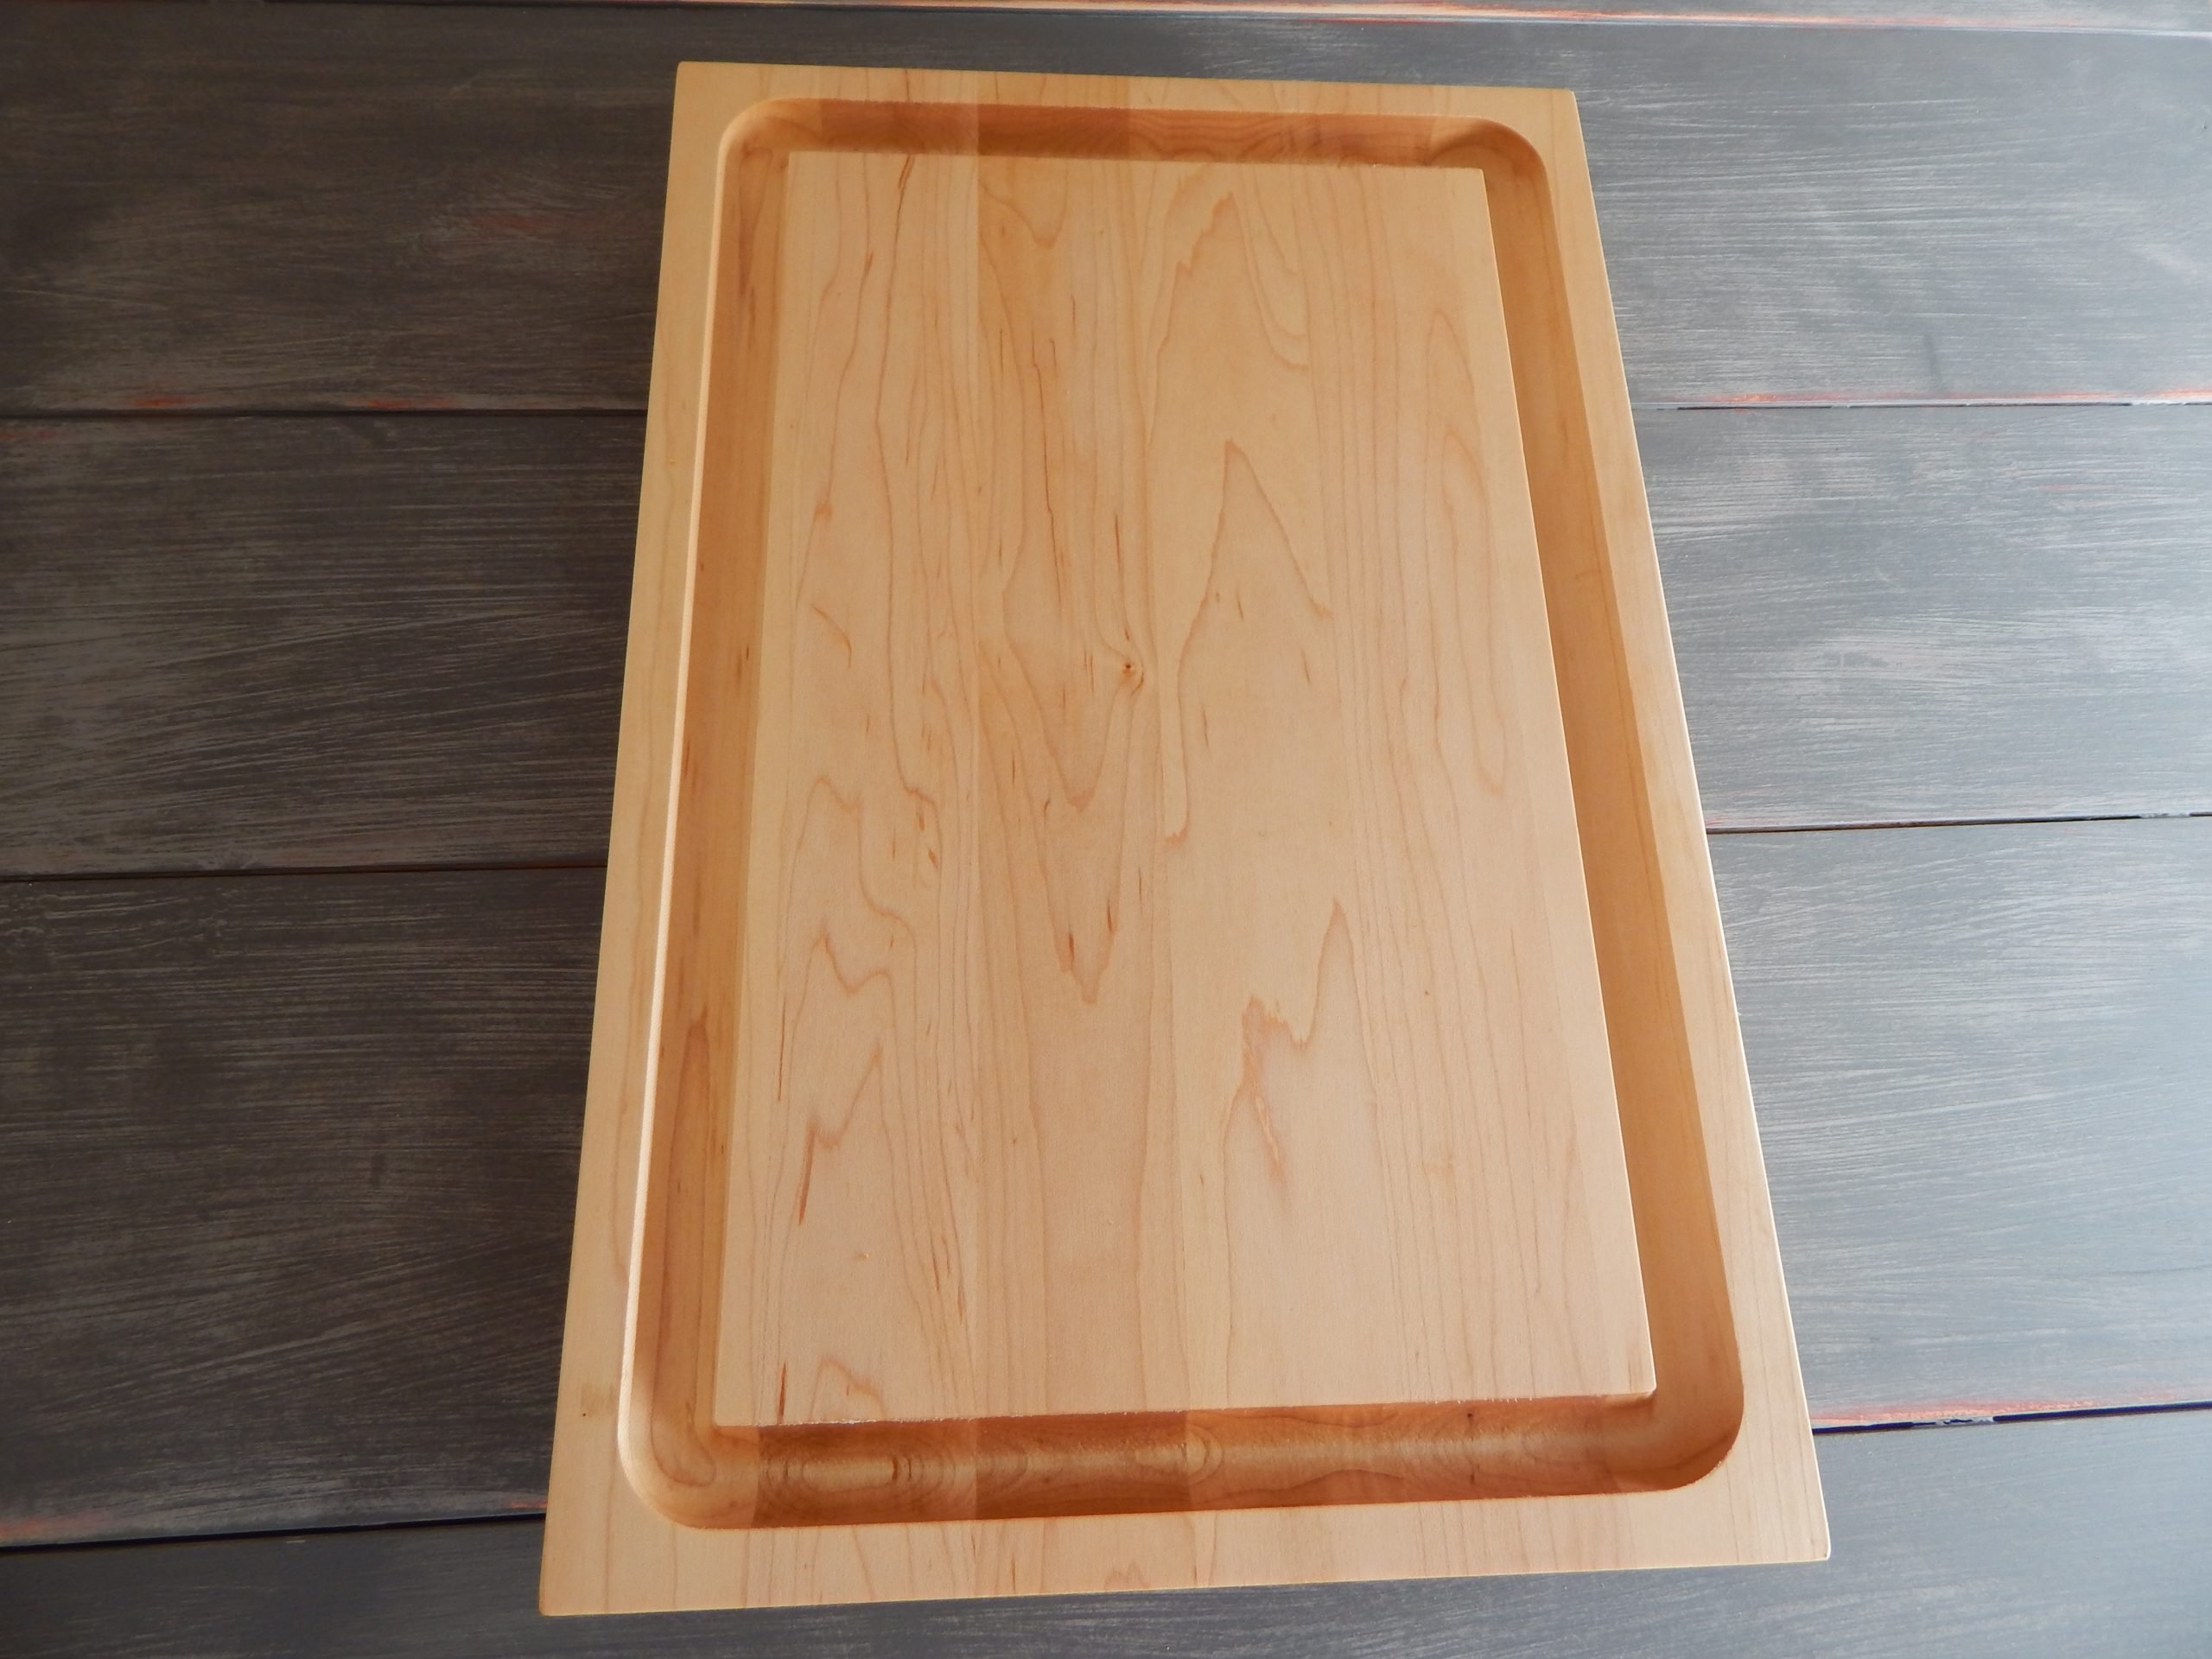 https://www.eastbaycuttingboards.com/wp-content/uploads/2020/09/12x18-maple-trough-only-scaled.jpg